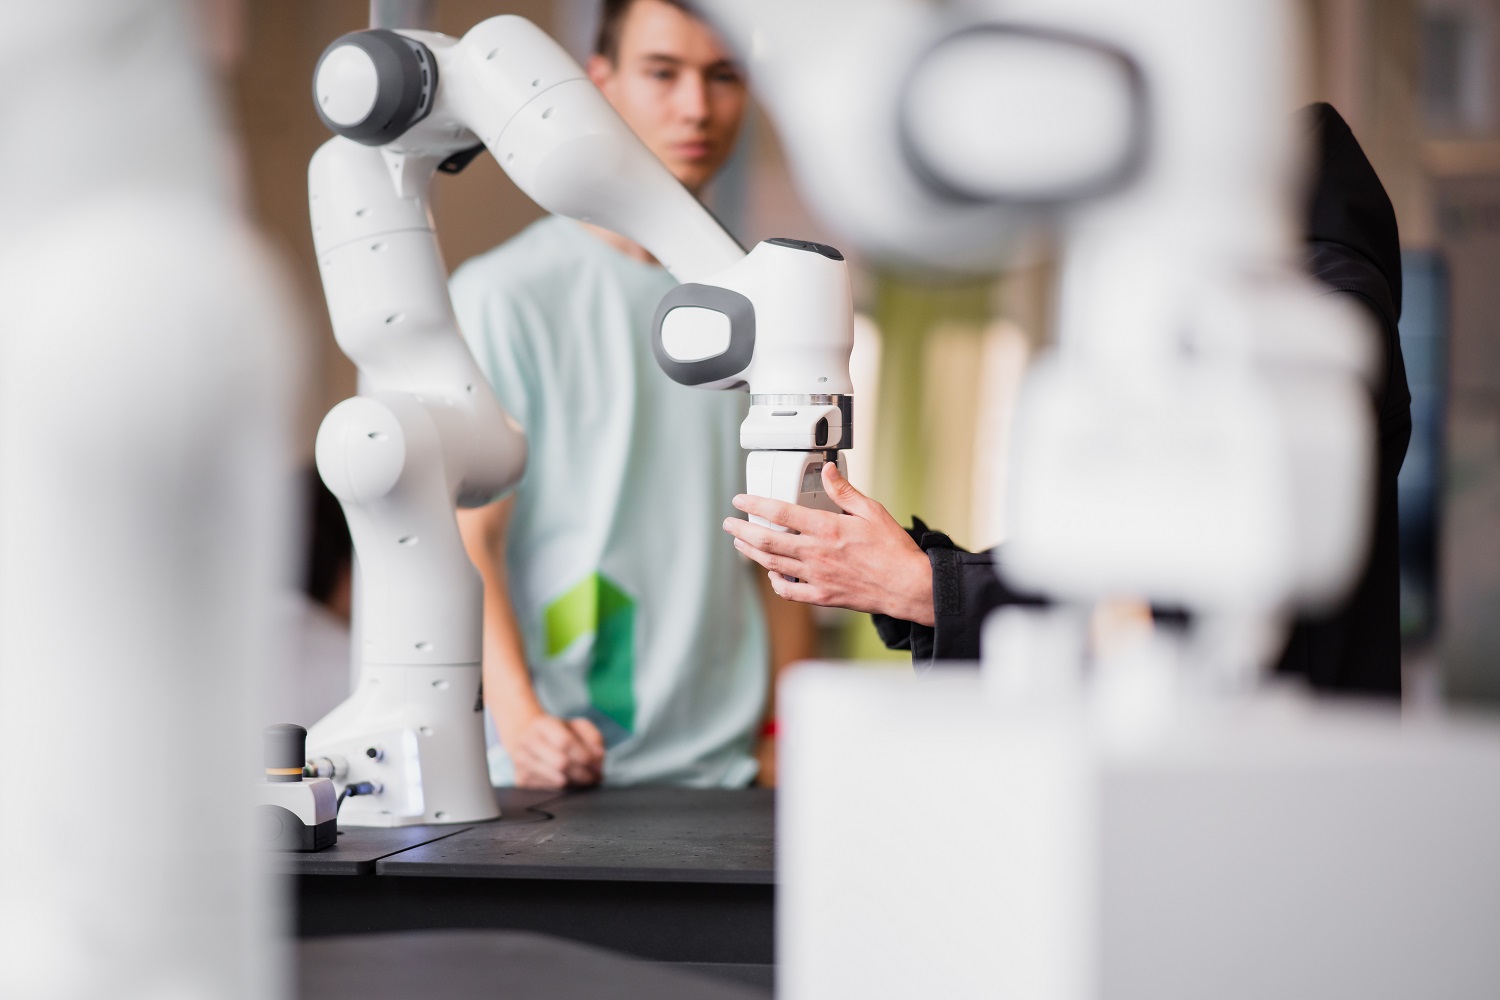 Two people standing around a robotic arm observing it